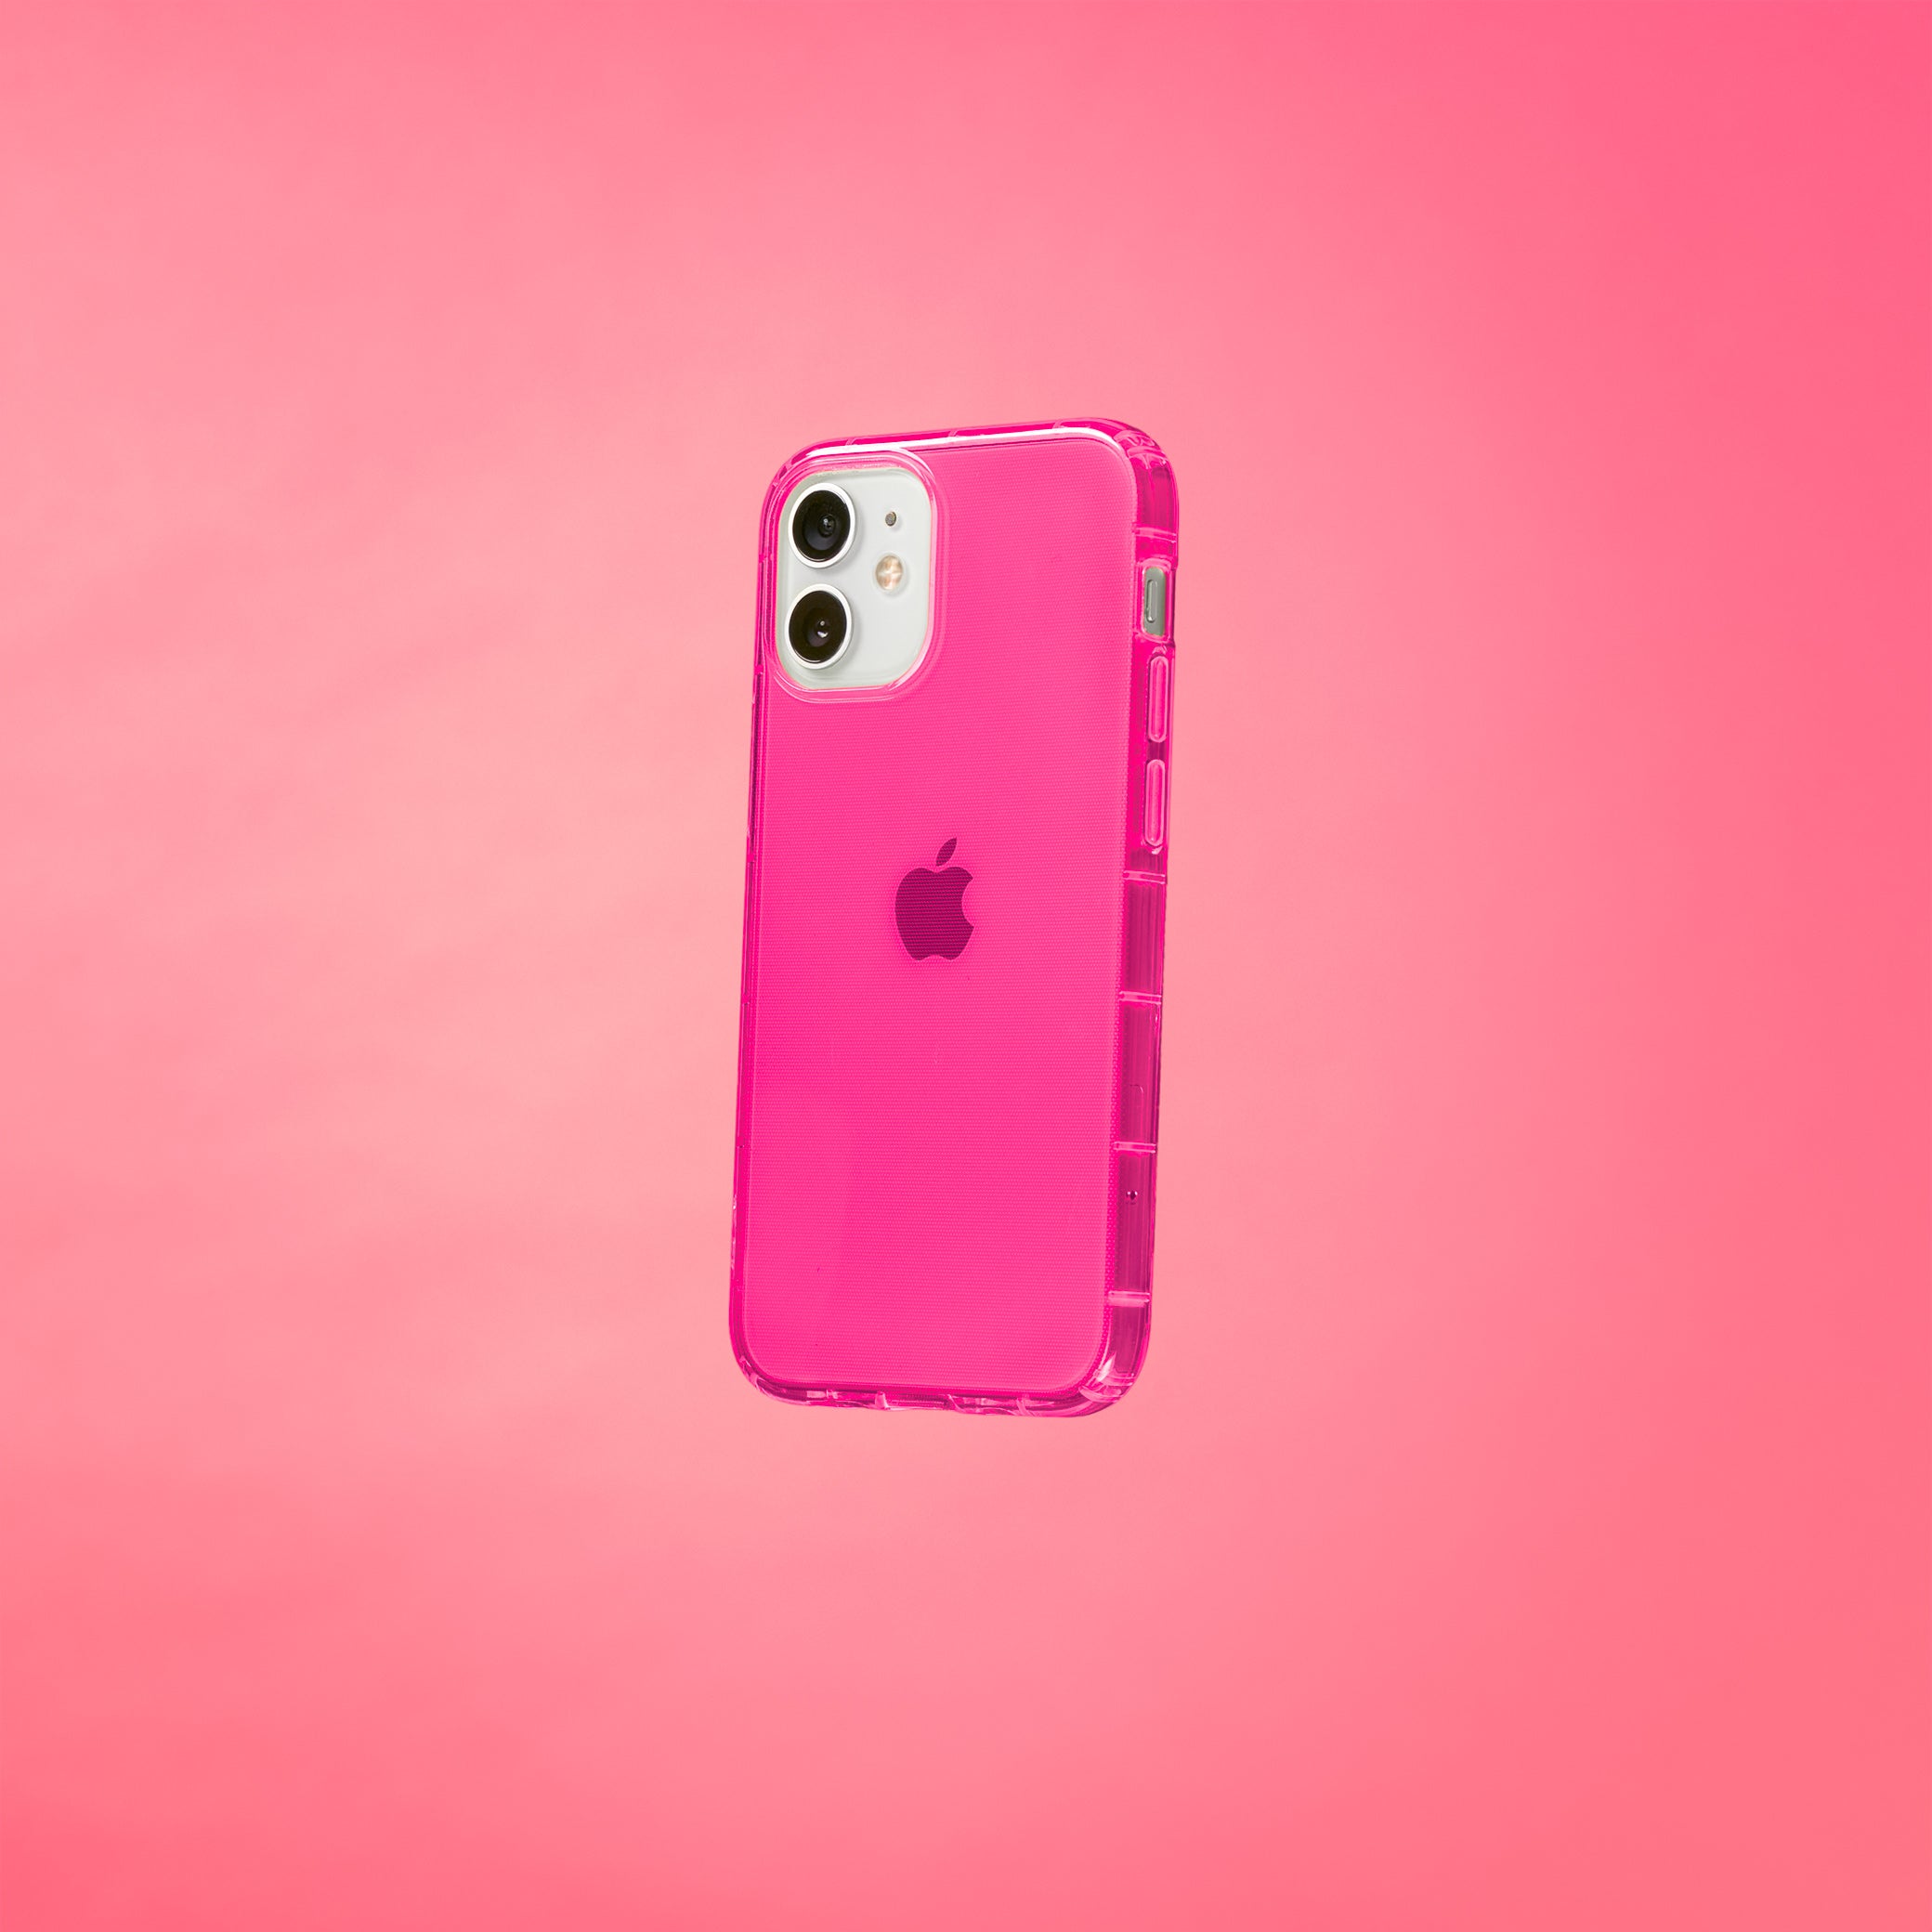 Highlighter Case for iPhone 12 MIni - Eye-Catching Hot Pink